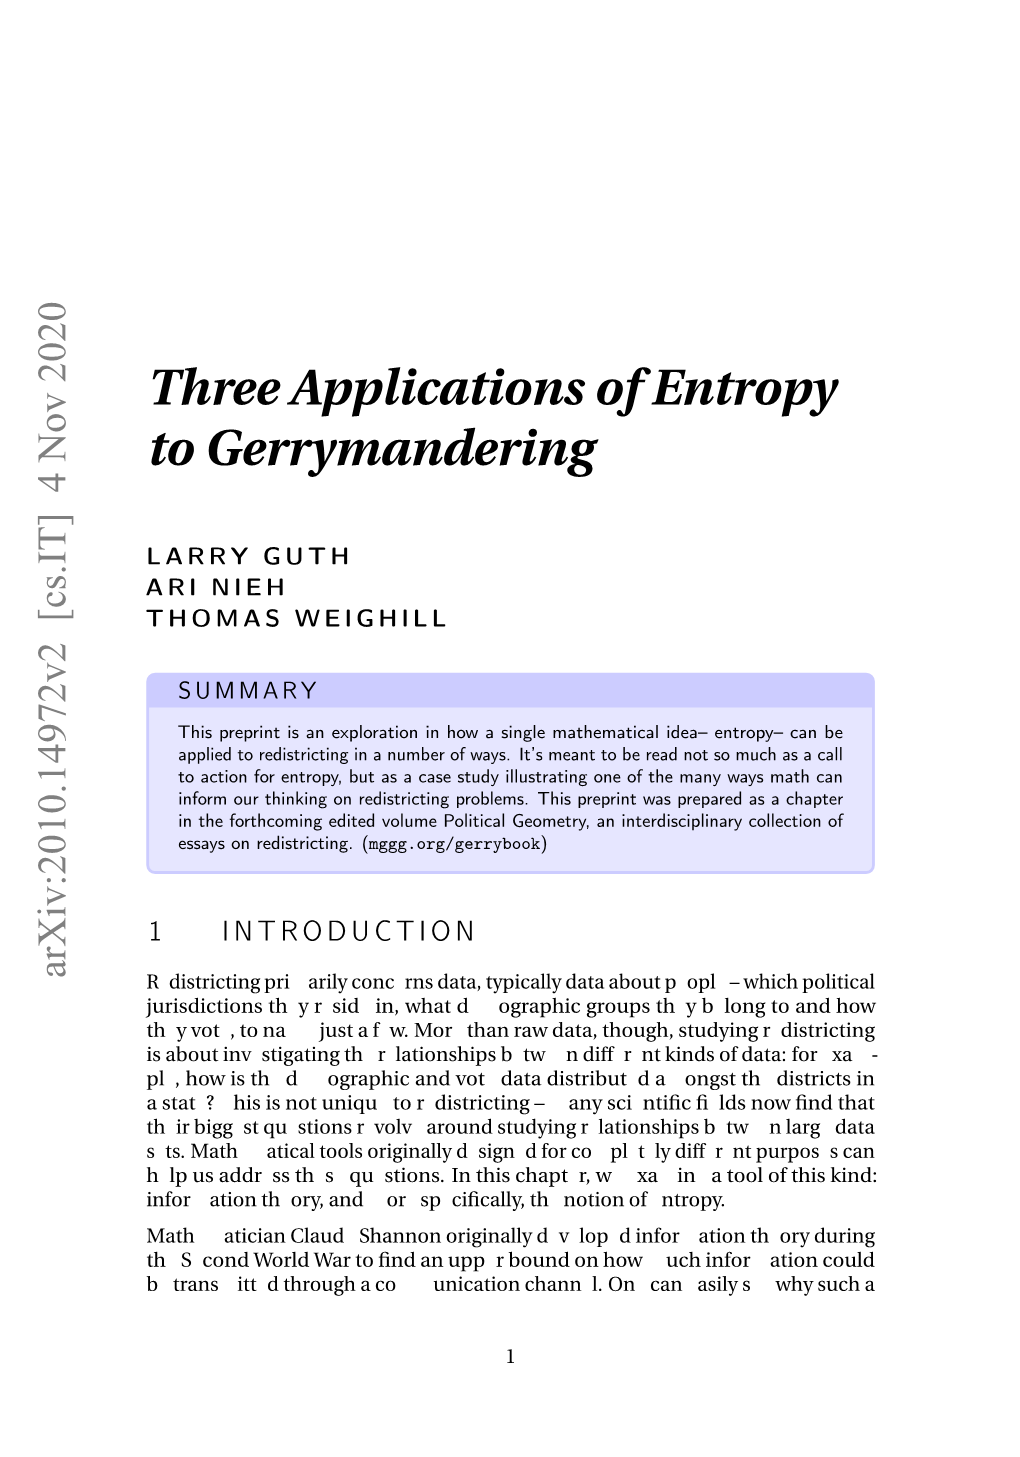 Three Applications of Entropy to Gerrymandering